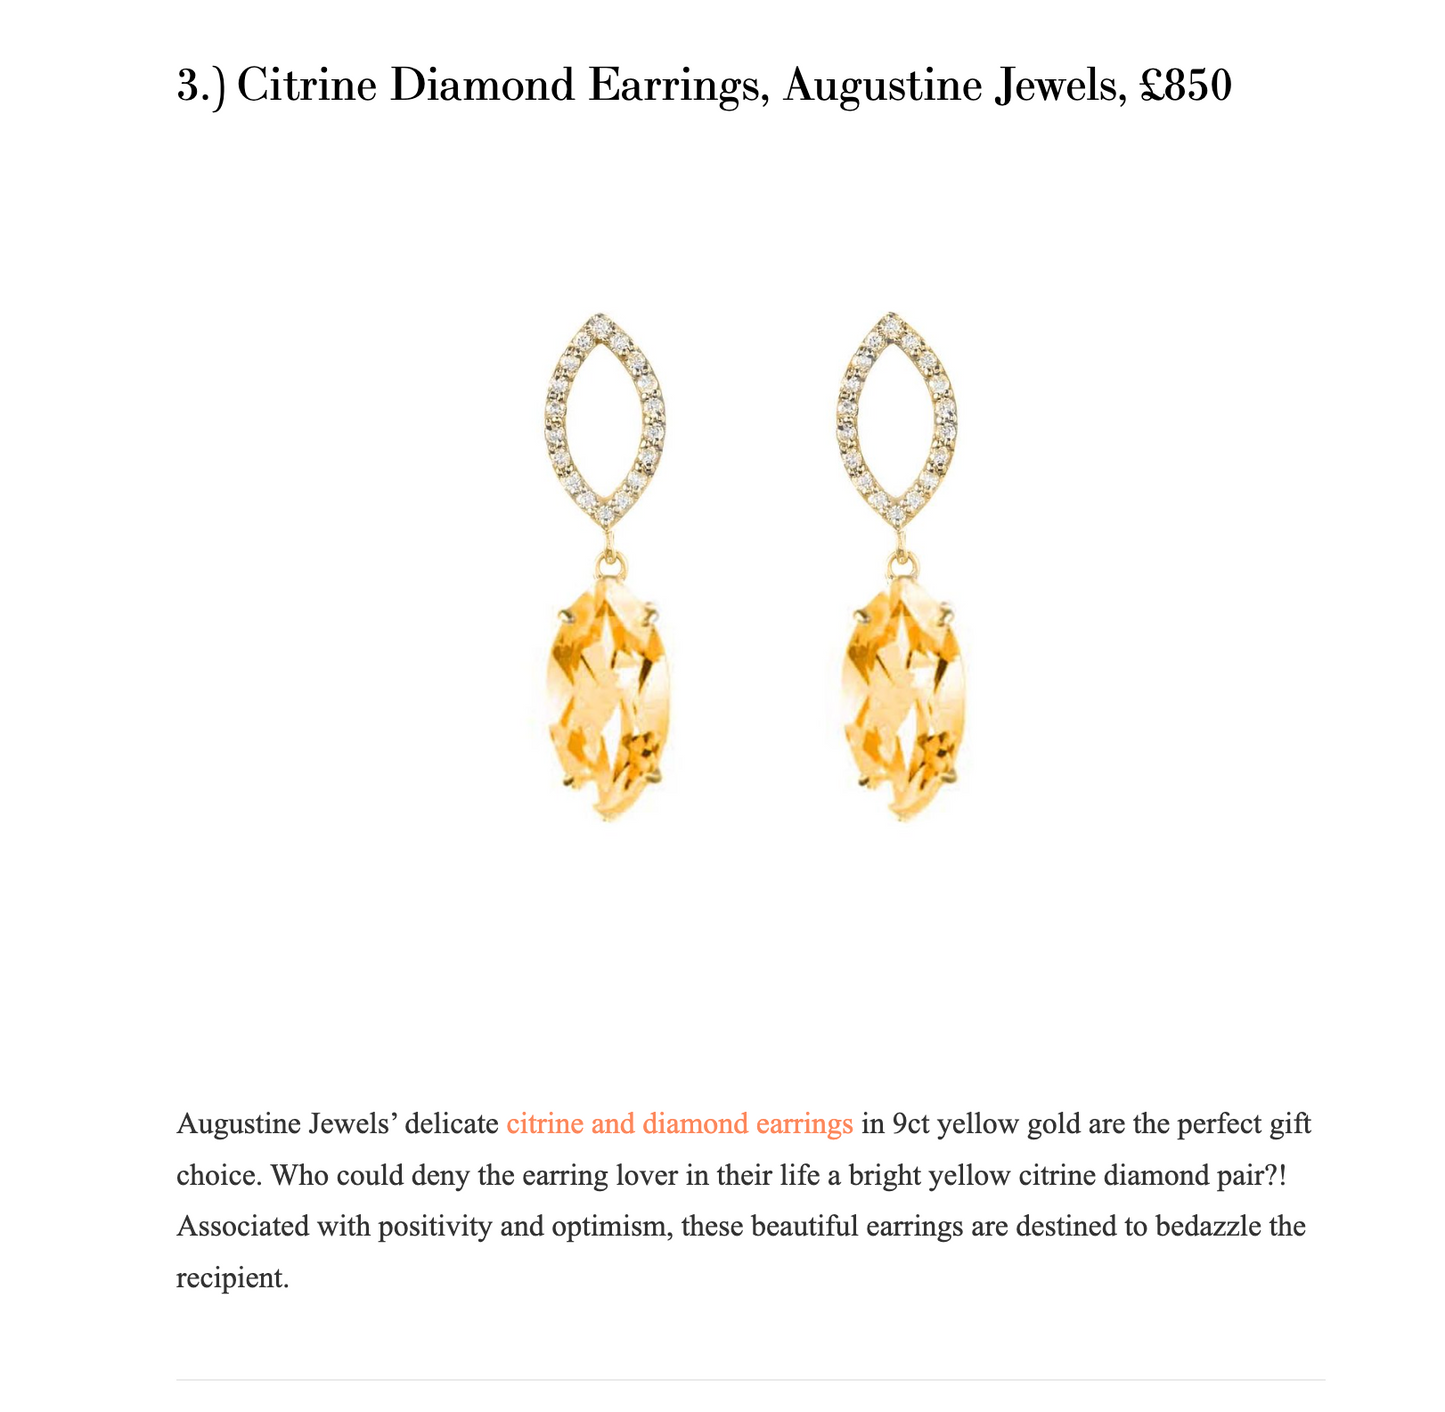 Augustine Jewels Featured in The Mayfair Musings Christmas Gift Guide